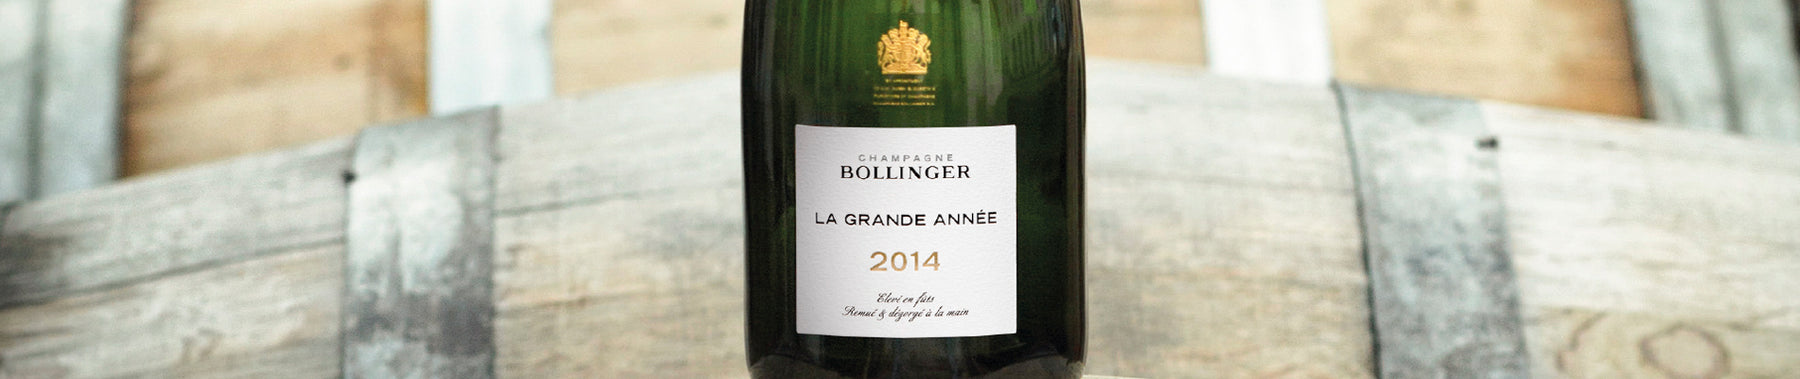 The Grand Journey A Discovery Of Cuisine & Perfect Pairings To Enhance La Grande Année 2014